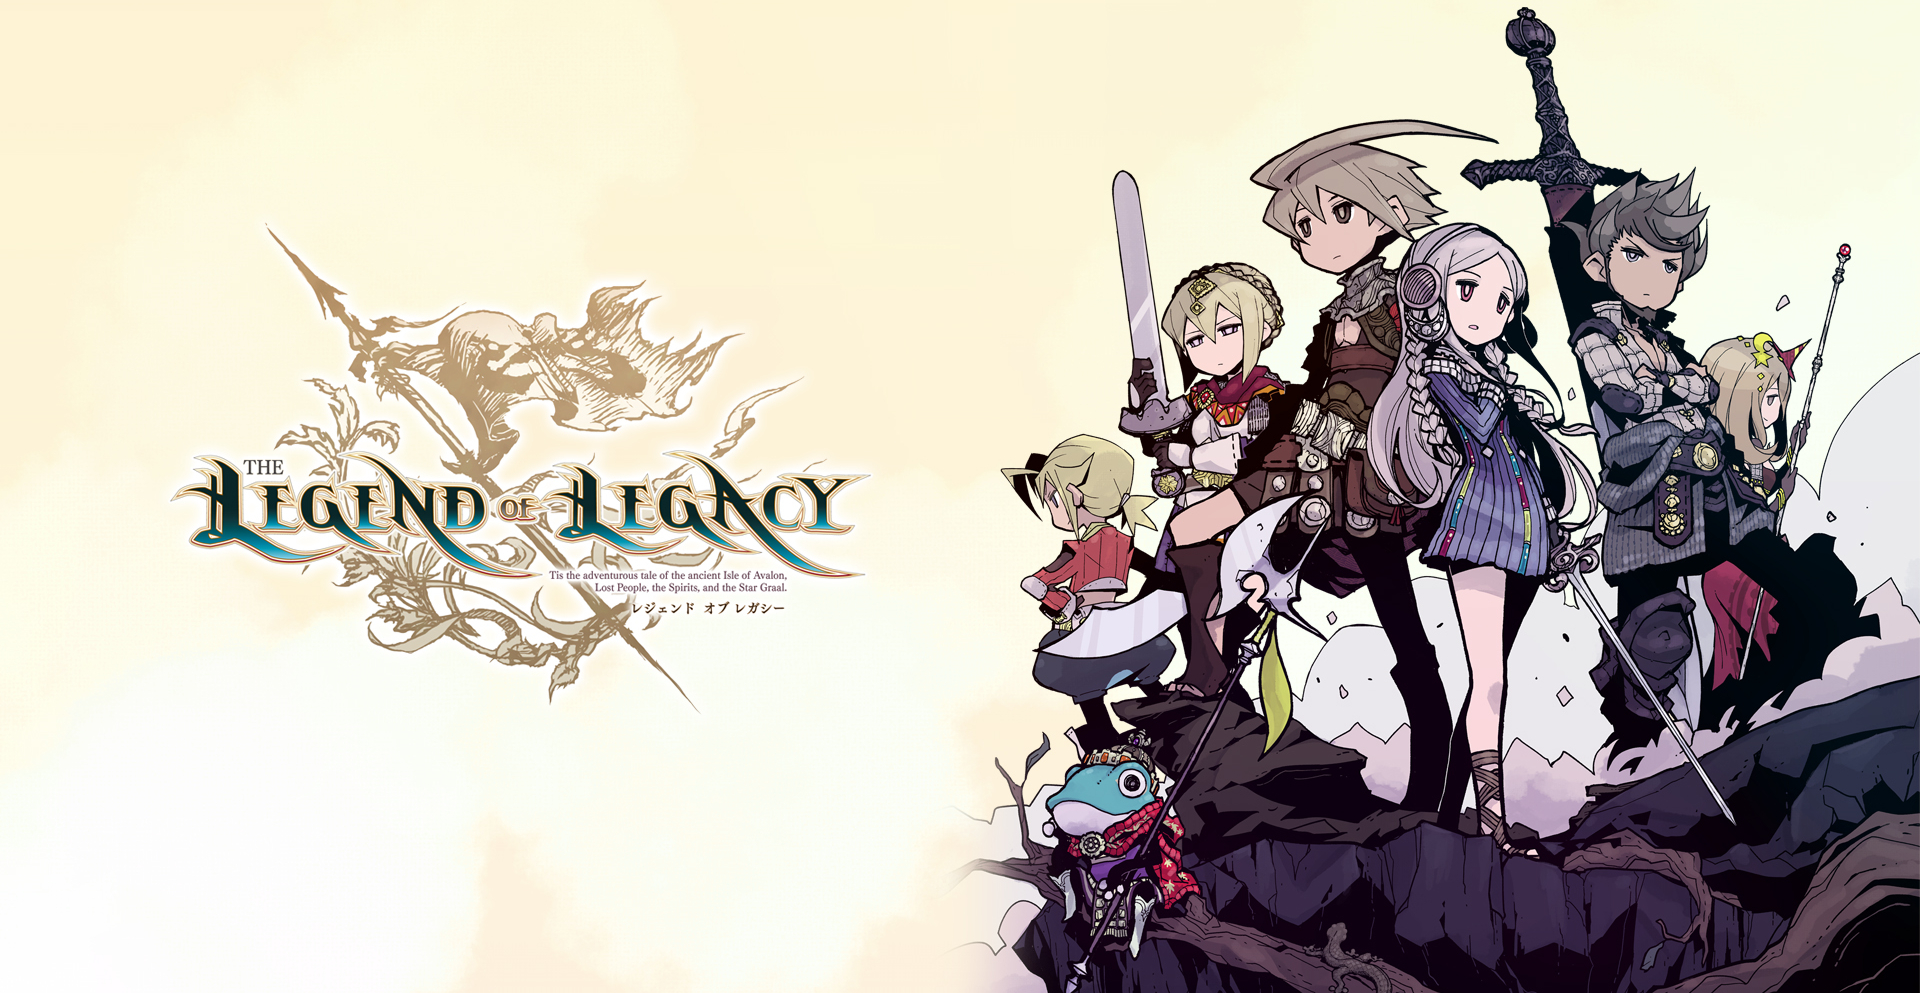 the legend of legacy